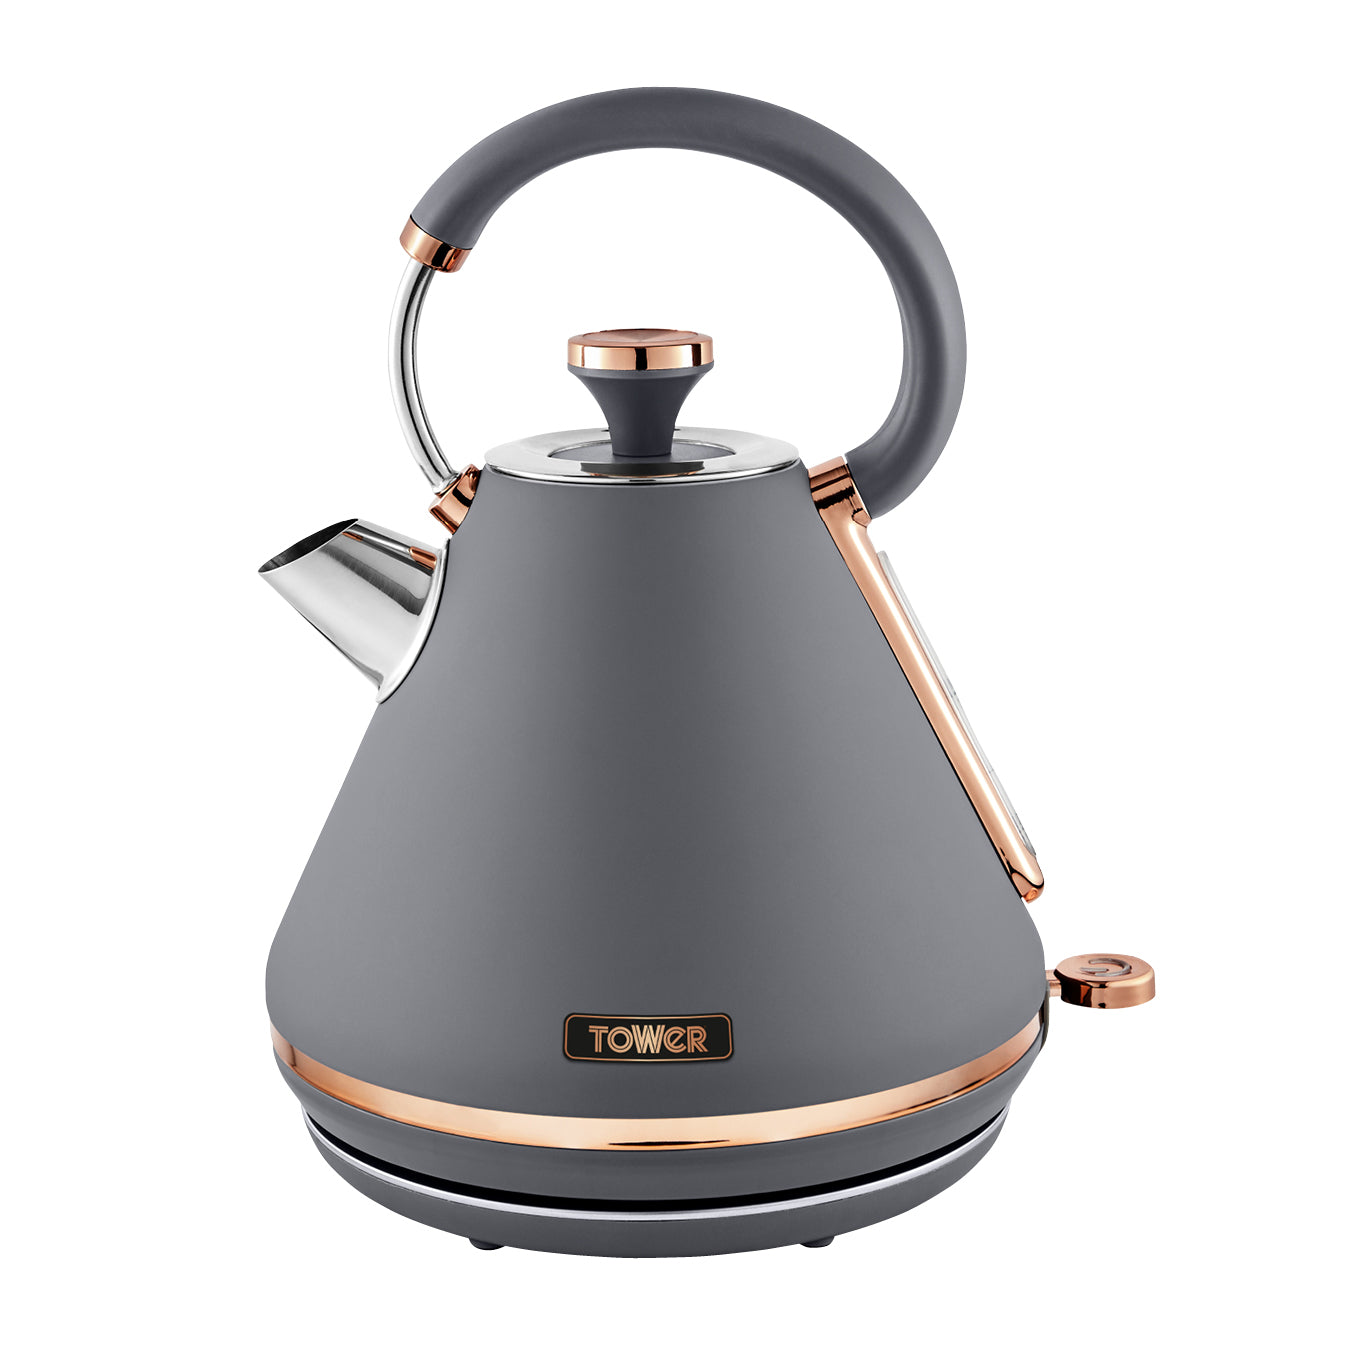 Tower Cavaletto 3KW 1.7 Litre Pyramid Kettle - Grey